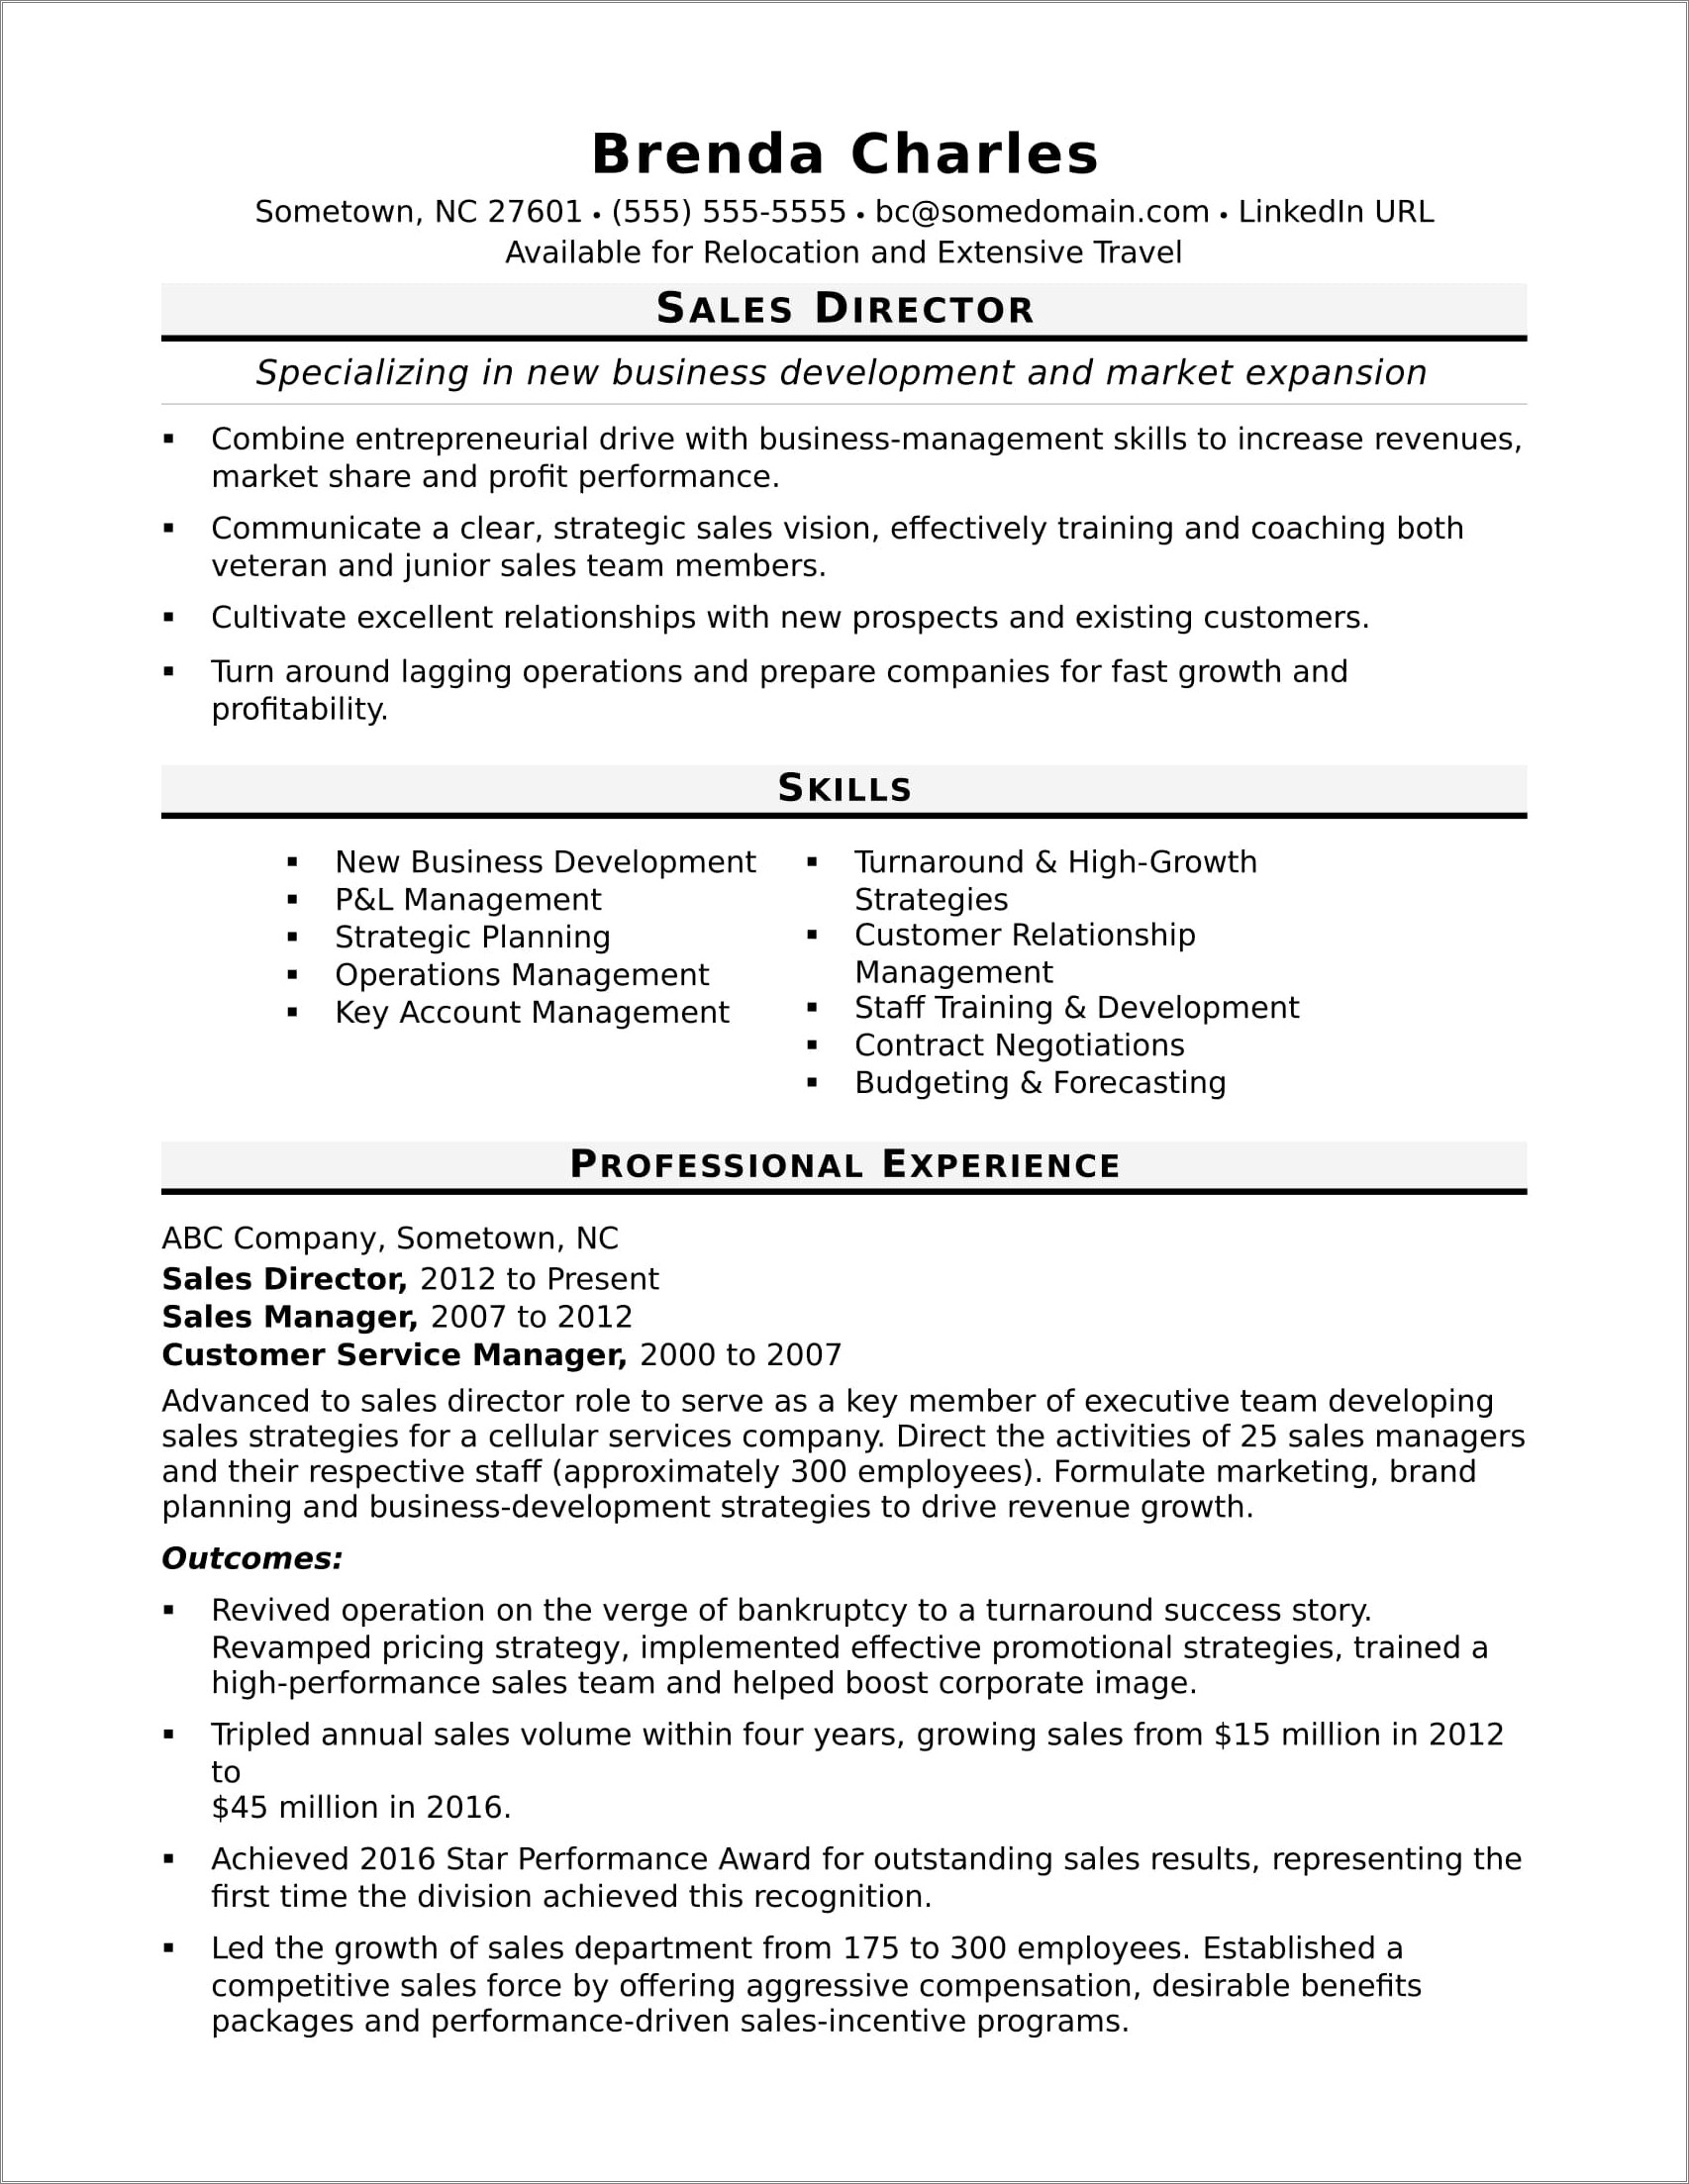 Resume Is A Skill Section Required